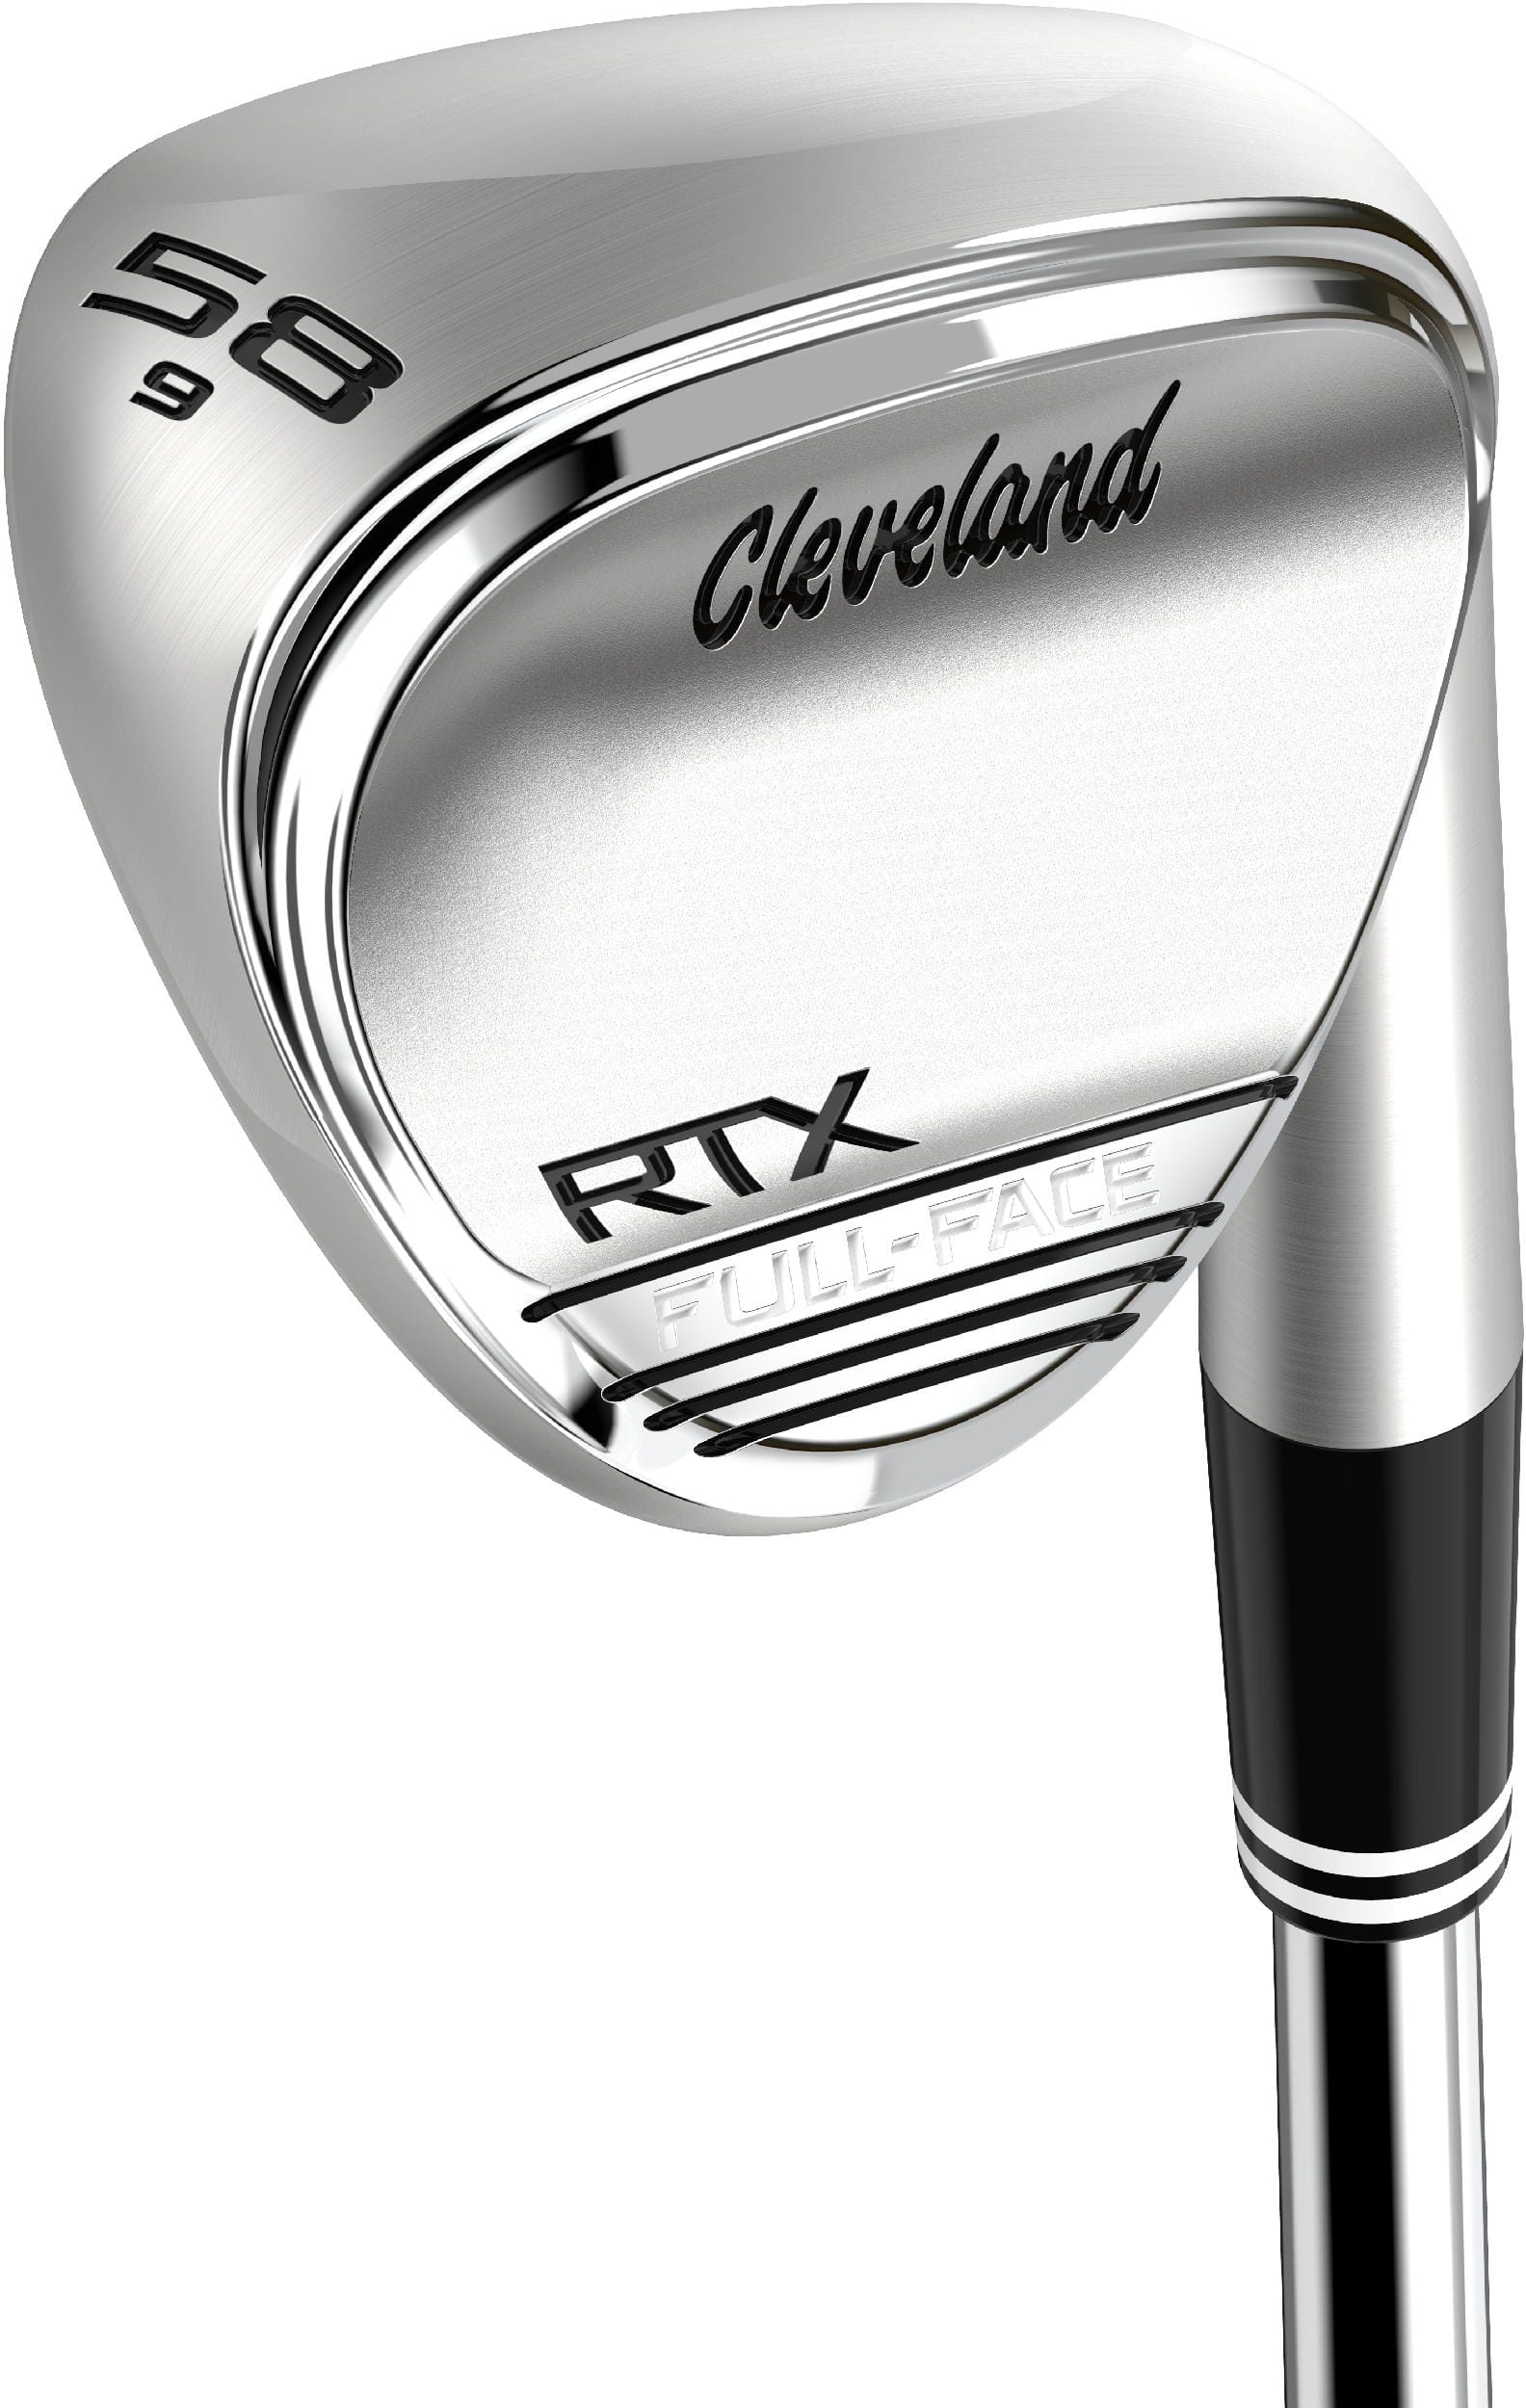 Cleveland RTX Full-Face Tour Satin Wedge